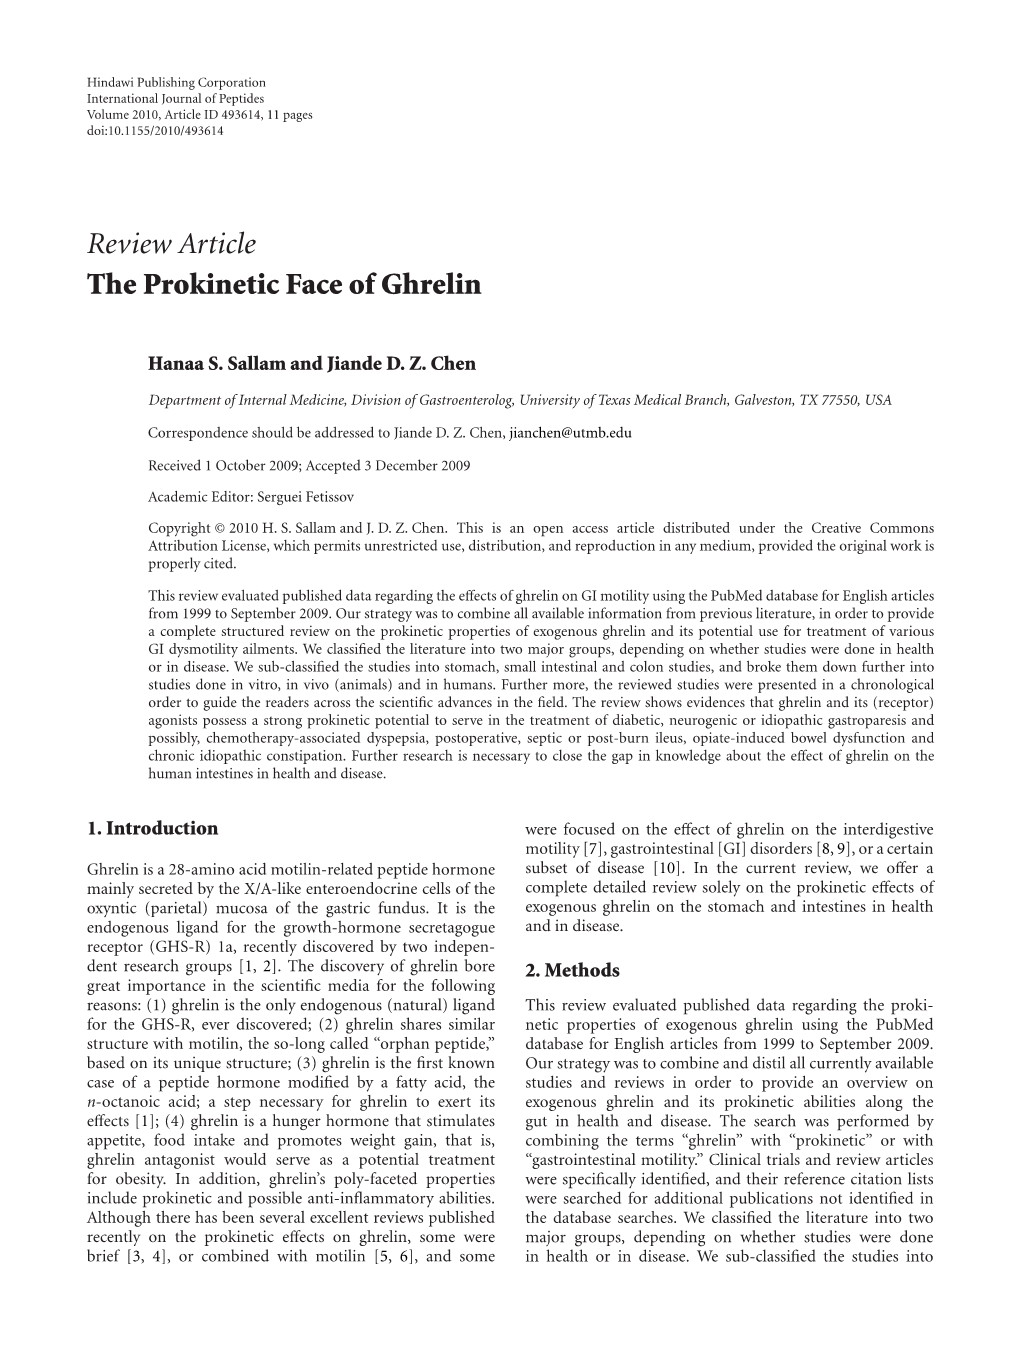 Review Article the Prokinetic Face of Ghrelin